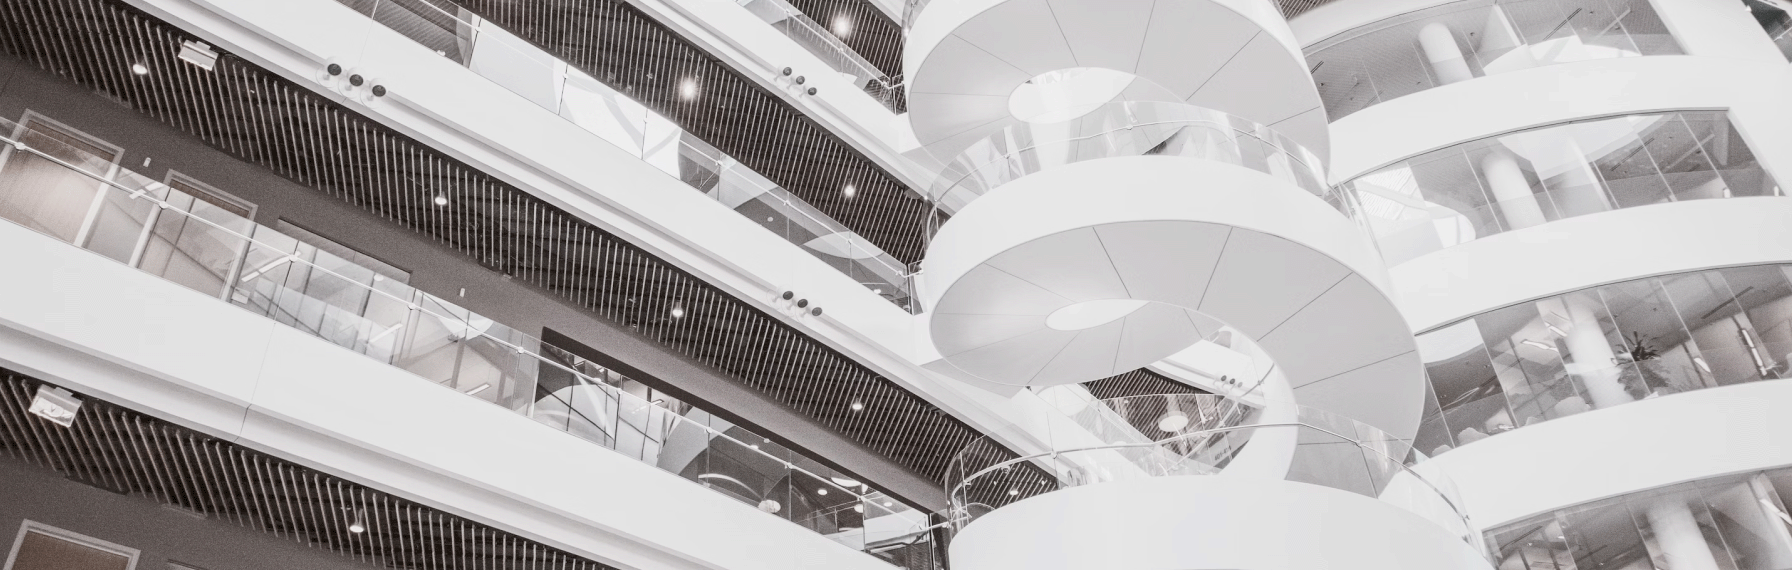 Spiral staircase in an office building